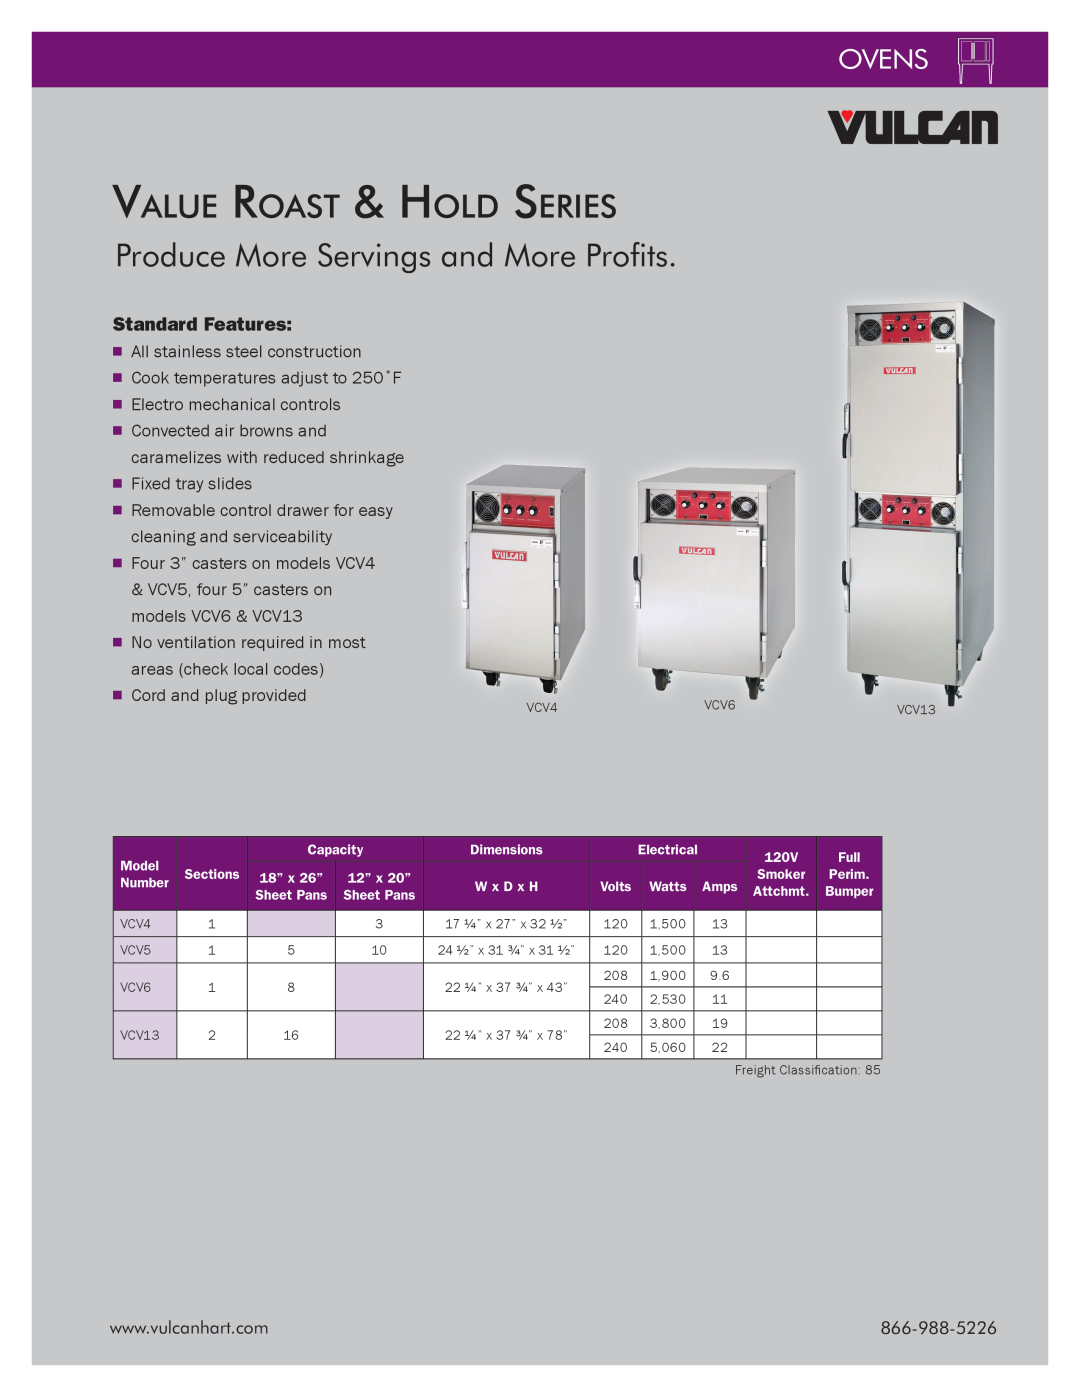 Vulcan-Hart VCH16, VCH5, VCH8 Value Roast & Hold Series, Produce More Servings and More Profits, Ovens, Standard Features 